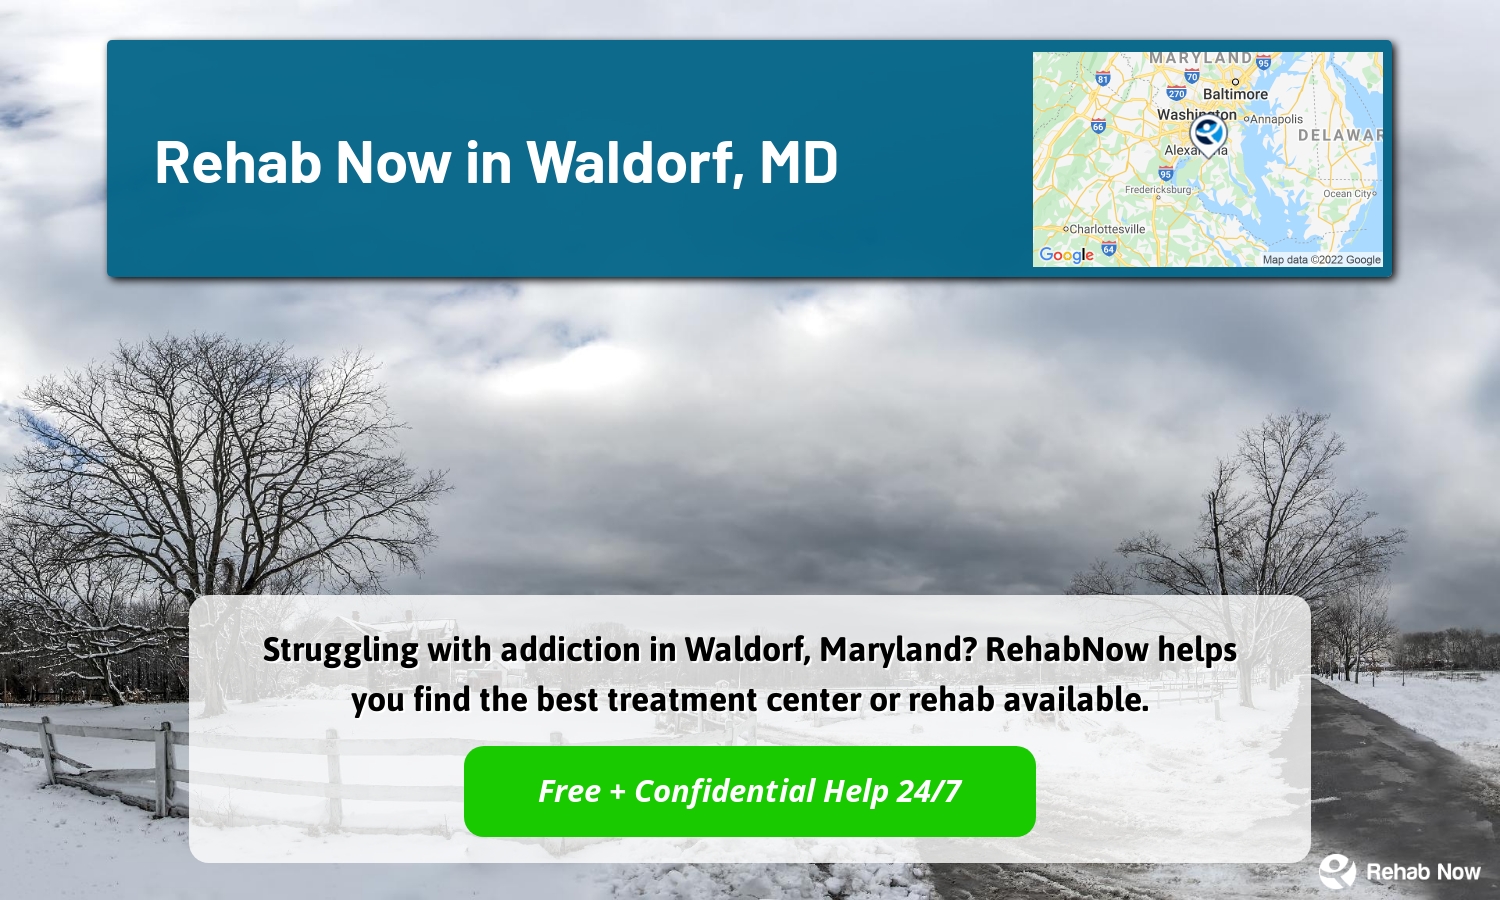 Struggling with addiction in Waldorf, Maryland? RehabNow helps you find the best treatment center or rehab available.